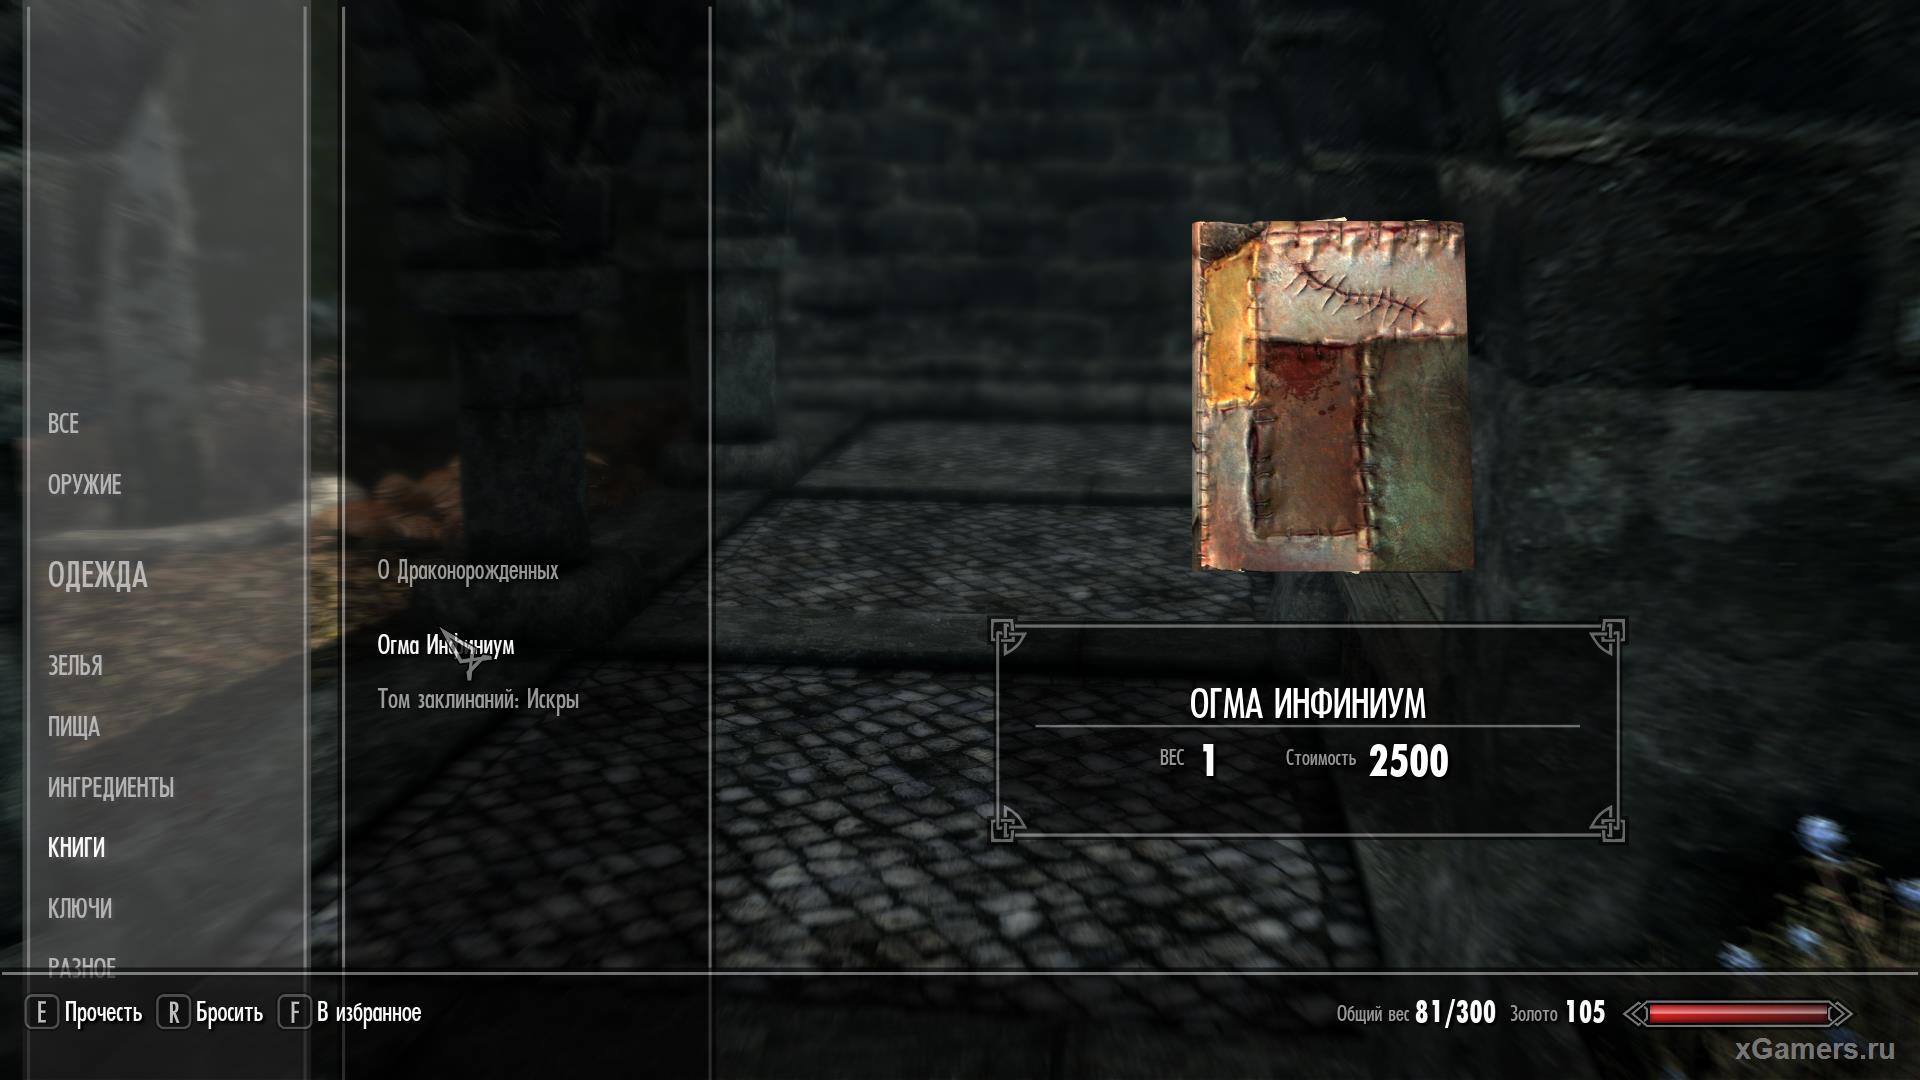 Items without enchantment in the game Skyrim